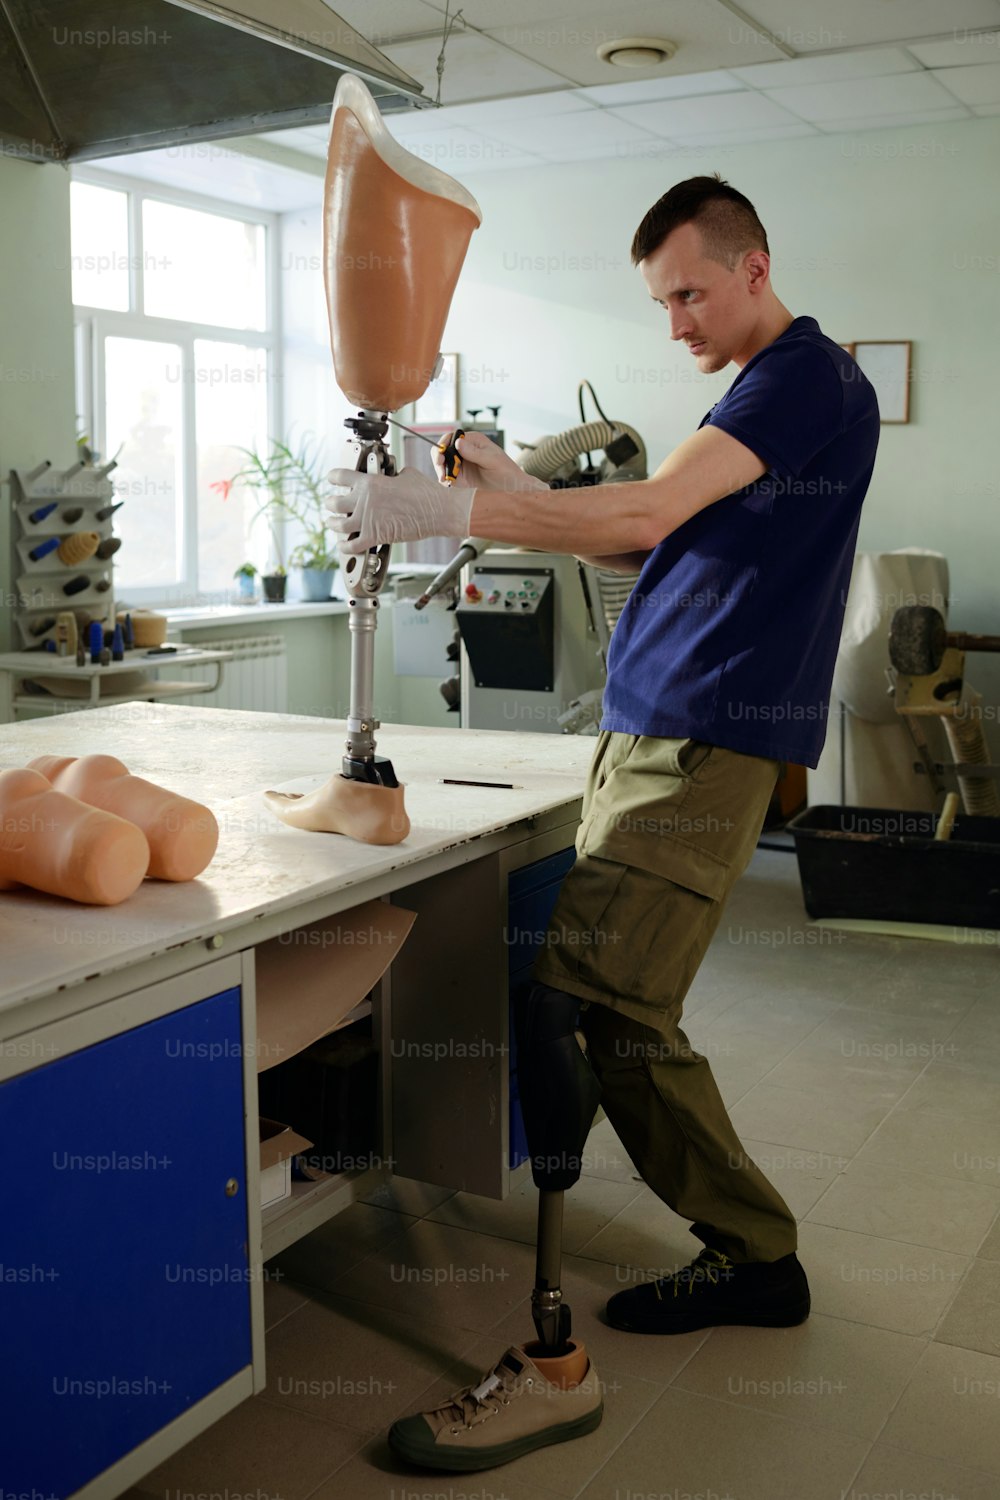 Manual worker with disability standing by table while assembling leg prosthesis and putting parts of mechanism together